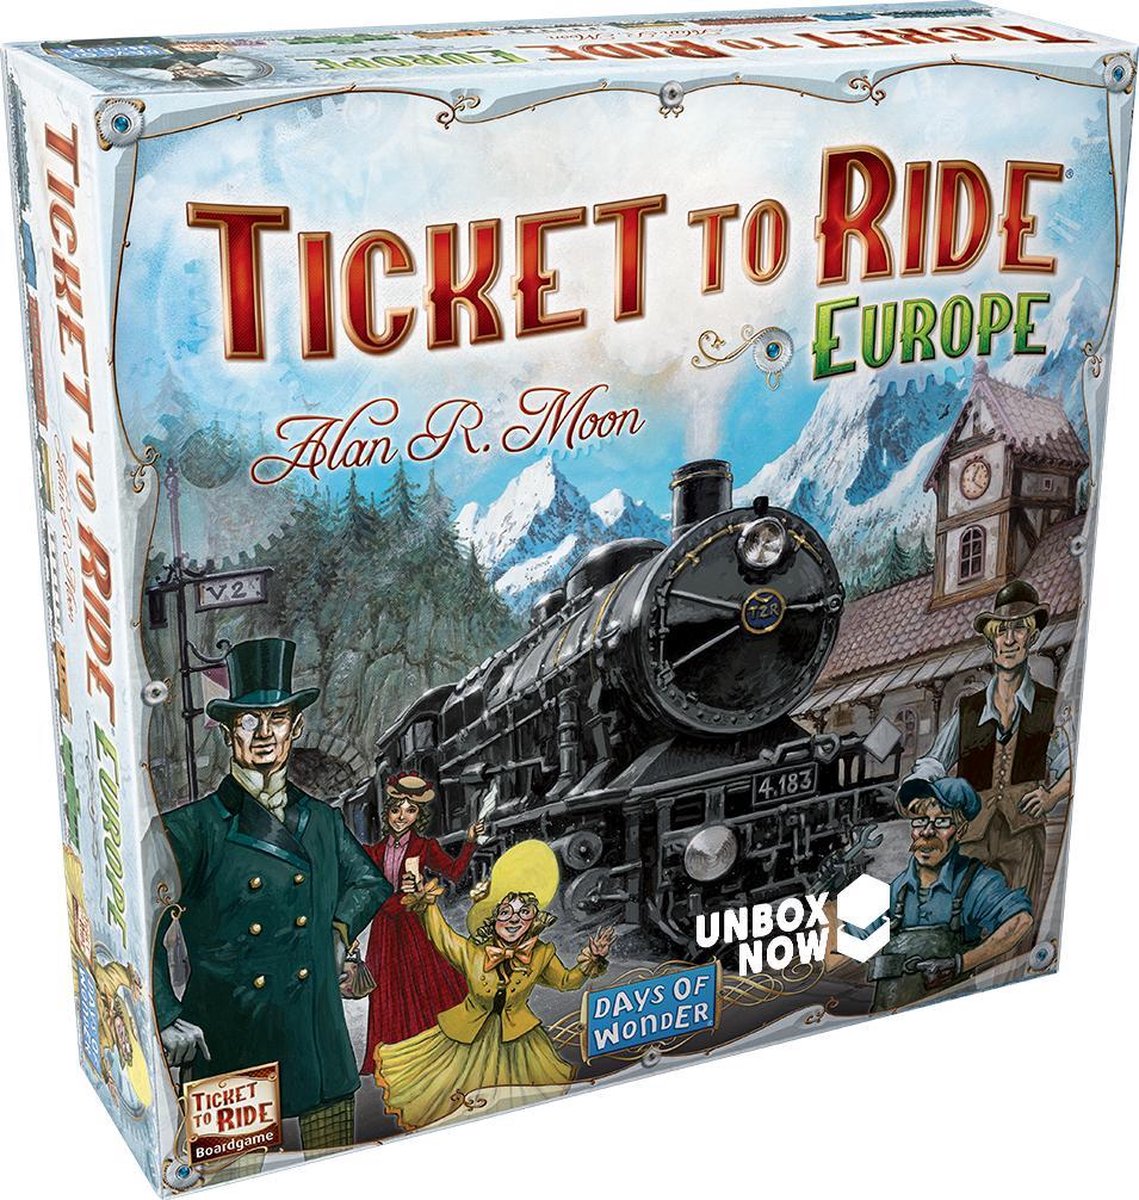 TICKET TO RIDE - 1 10 20 30 40 50 60 70 80 90 100 110 120 130 140 150 160 170 180 190 200 210 220 230 240 250 260 270 280 290 300 310 320 330 340 350 360 370 380 390 400 410 420 430 440 450 456